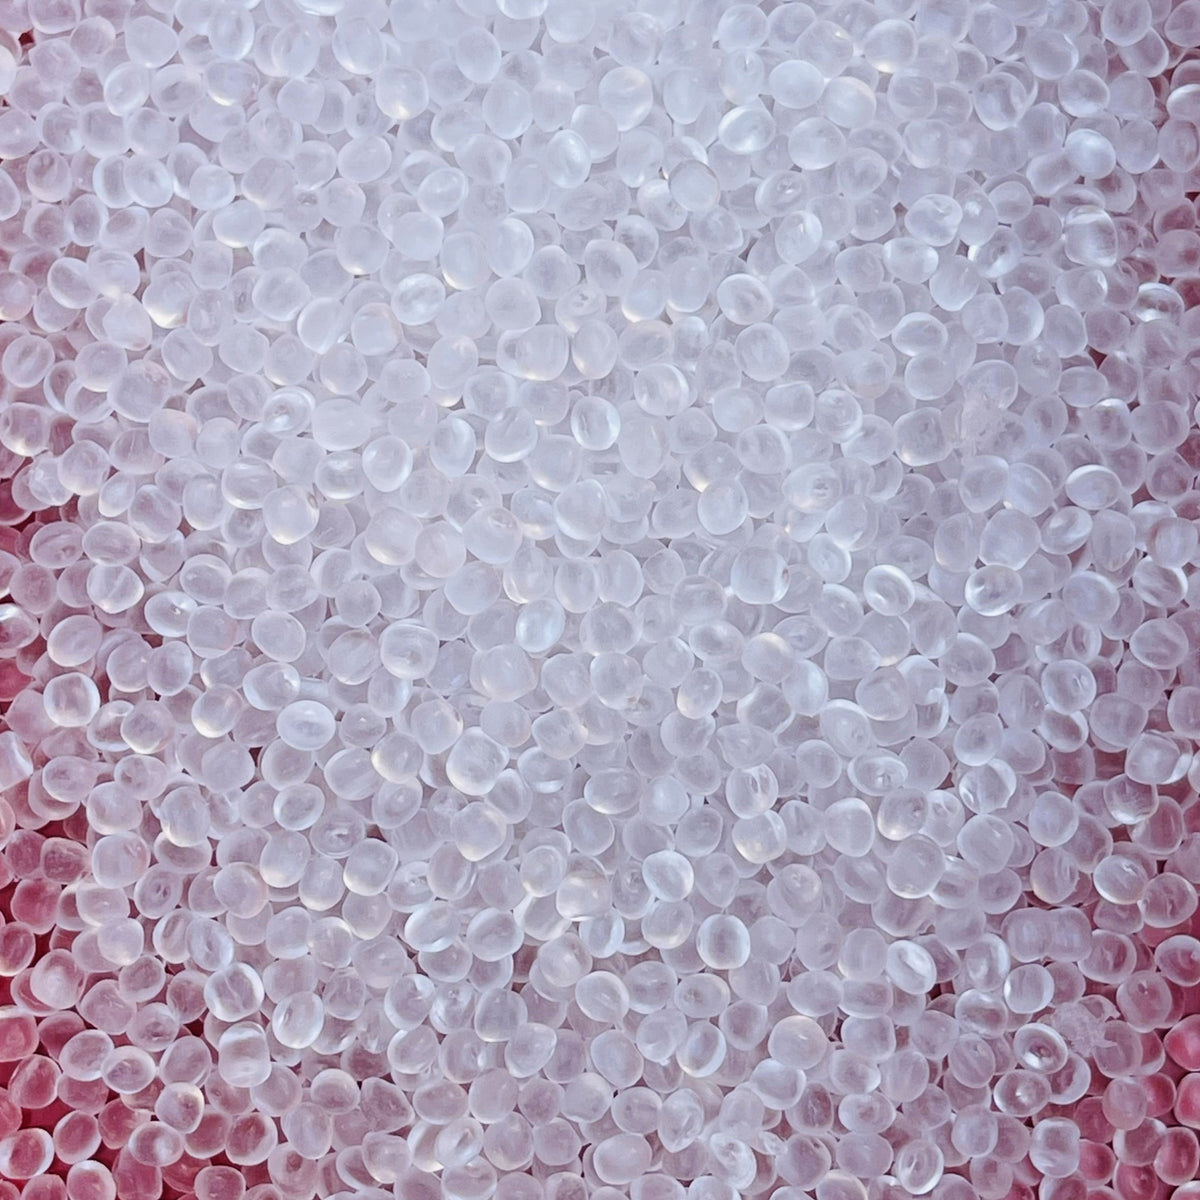 Virginia Candle Supply clear unscented aroma beads - 10 lb. bag for car  freshies, air fresheners, arts